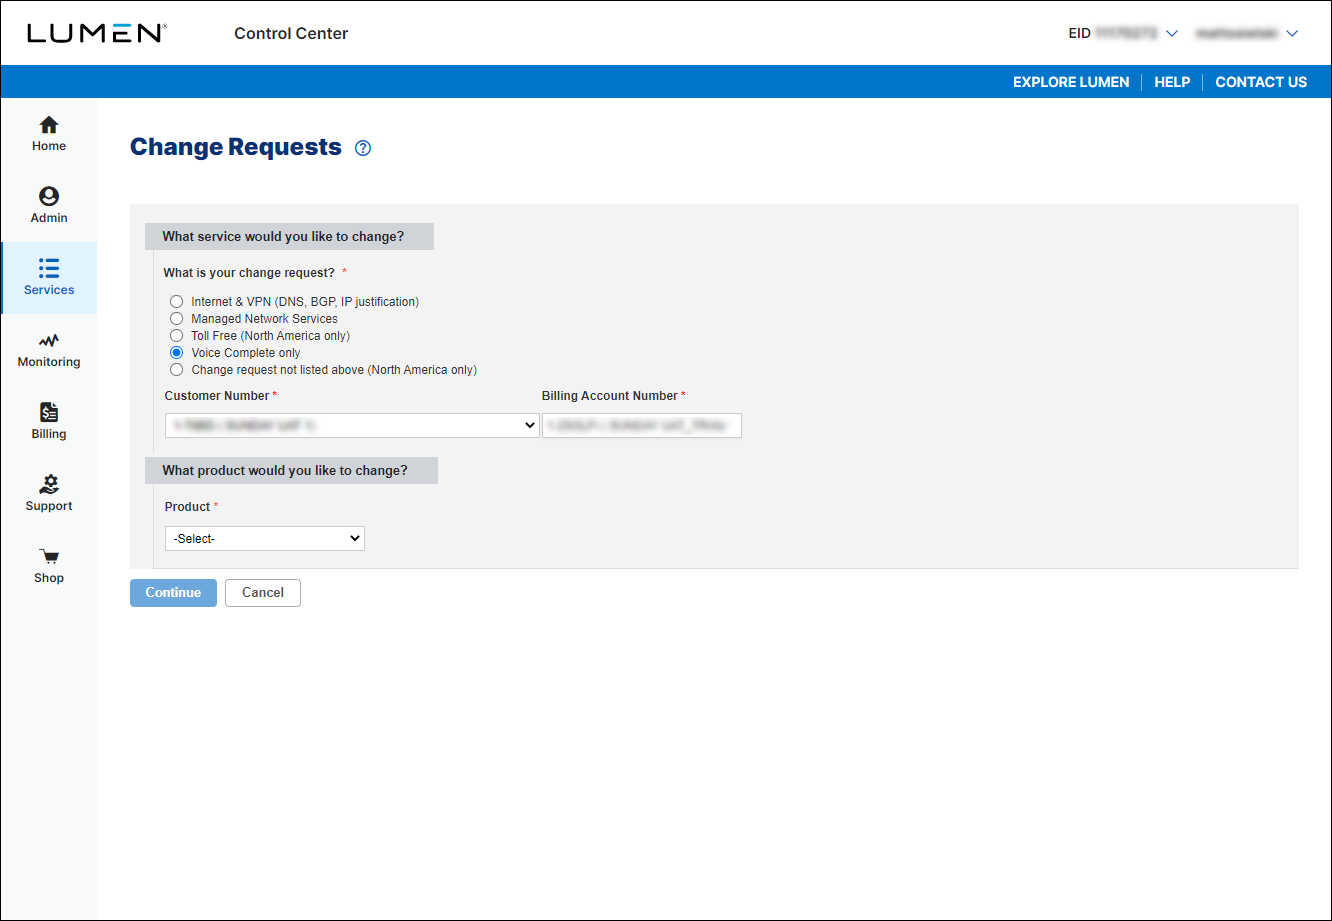 Change Requests (New Change Request for Voice Complete with customer number and billing account selected)